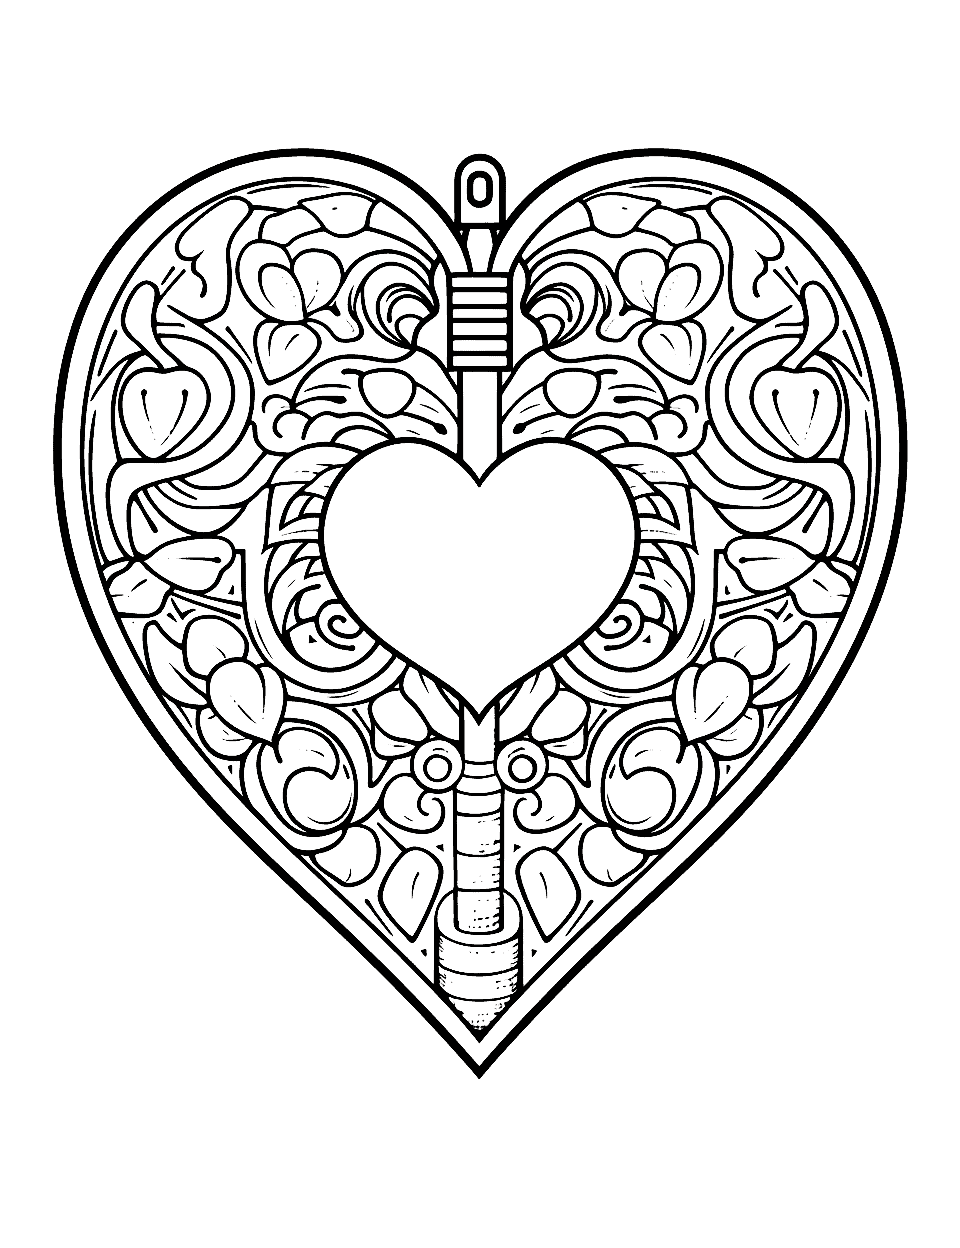 Heart Lock and Key Coloring Page - A heart-shaped lock with a fancy key.